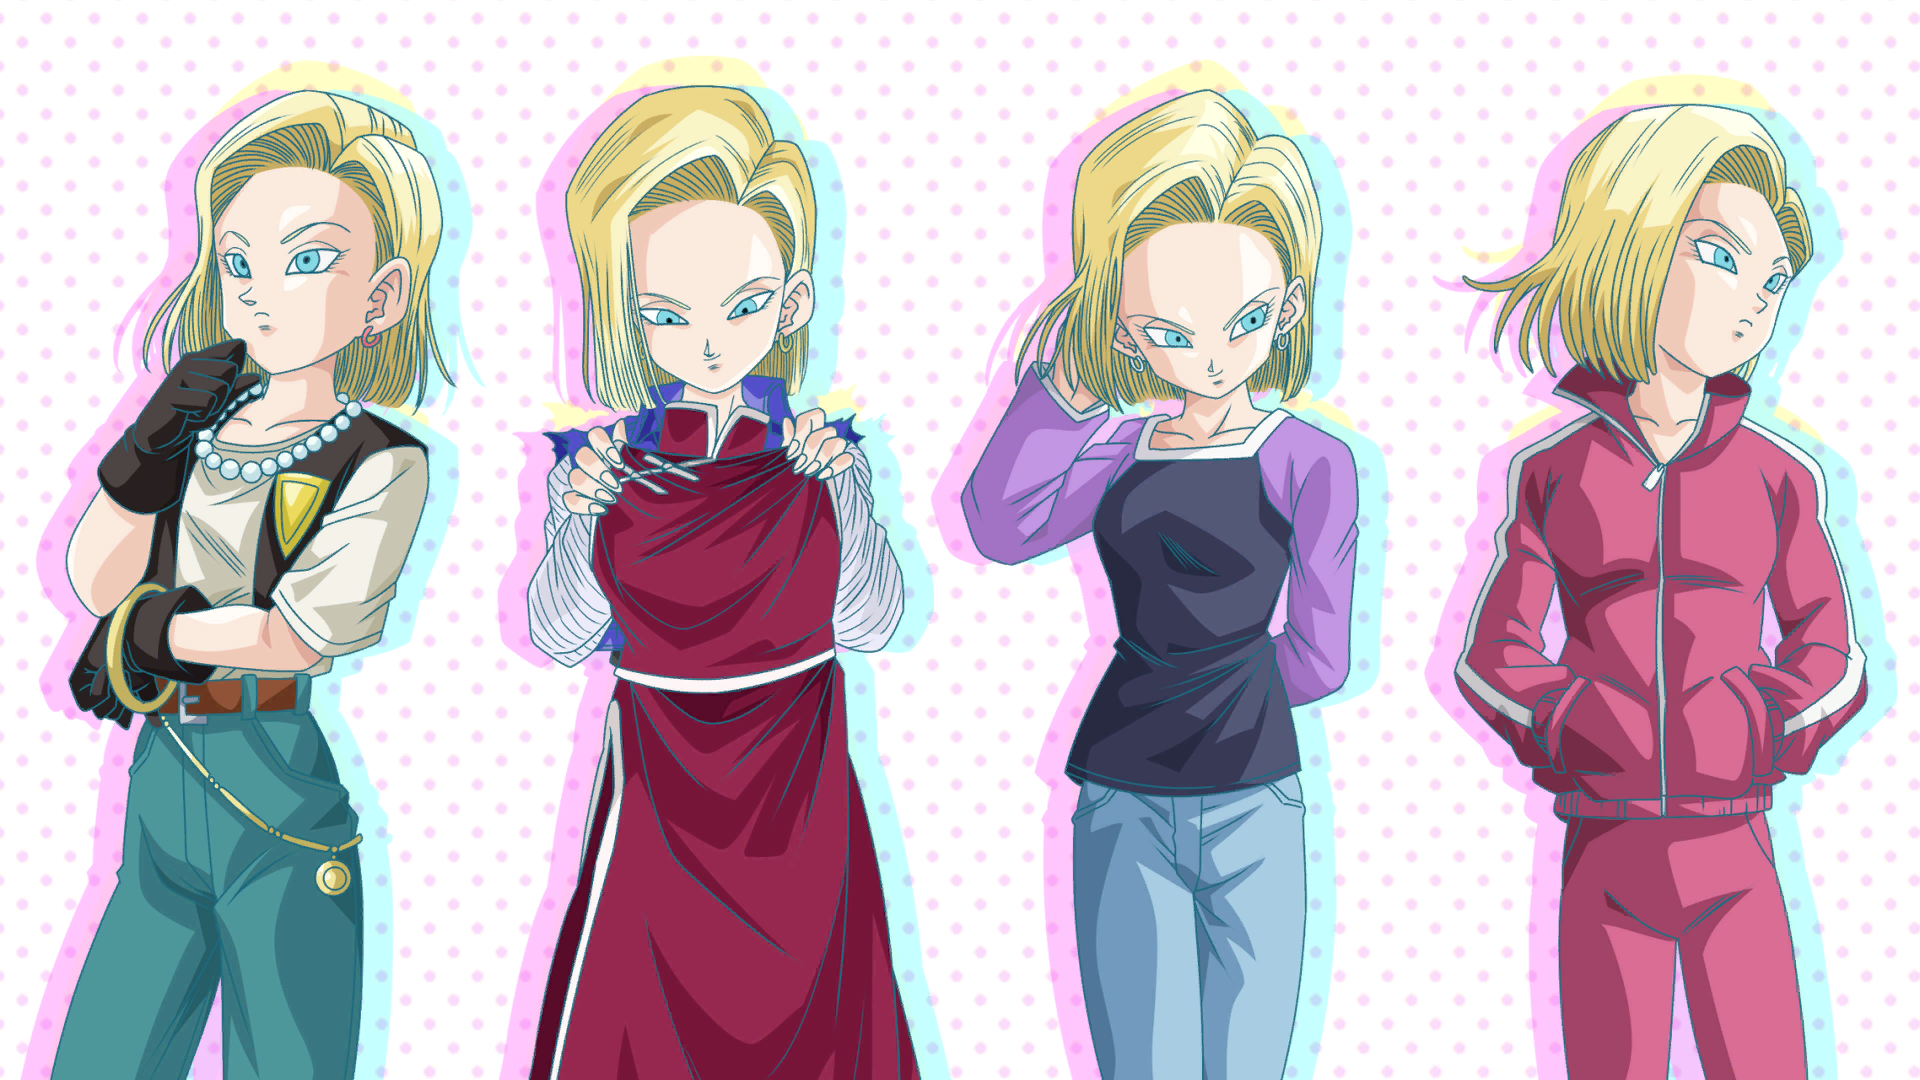 Dragon Ball Dragon Ball Xenoverse 2 Android 18 Blonde Earring Gloves Hands In Pockets Anime Girls Mi 1920x1080